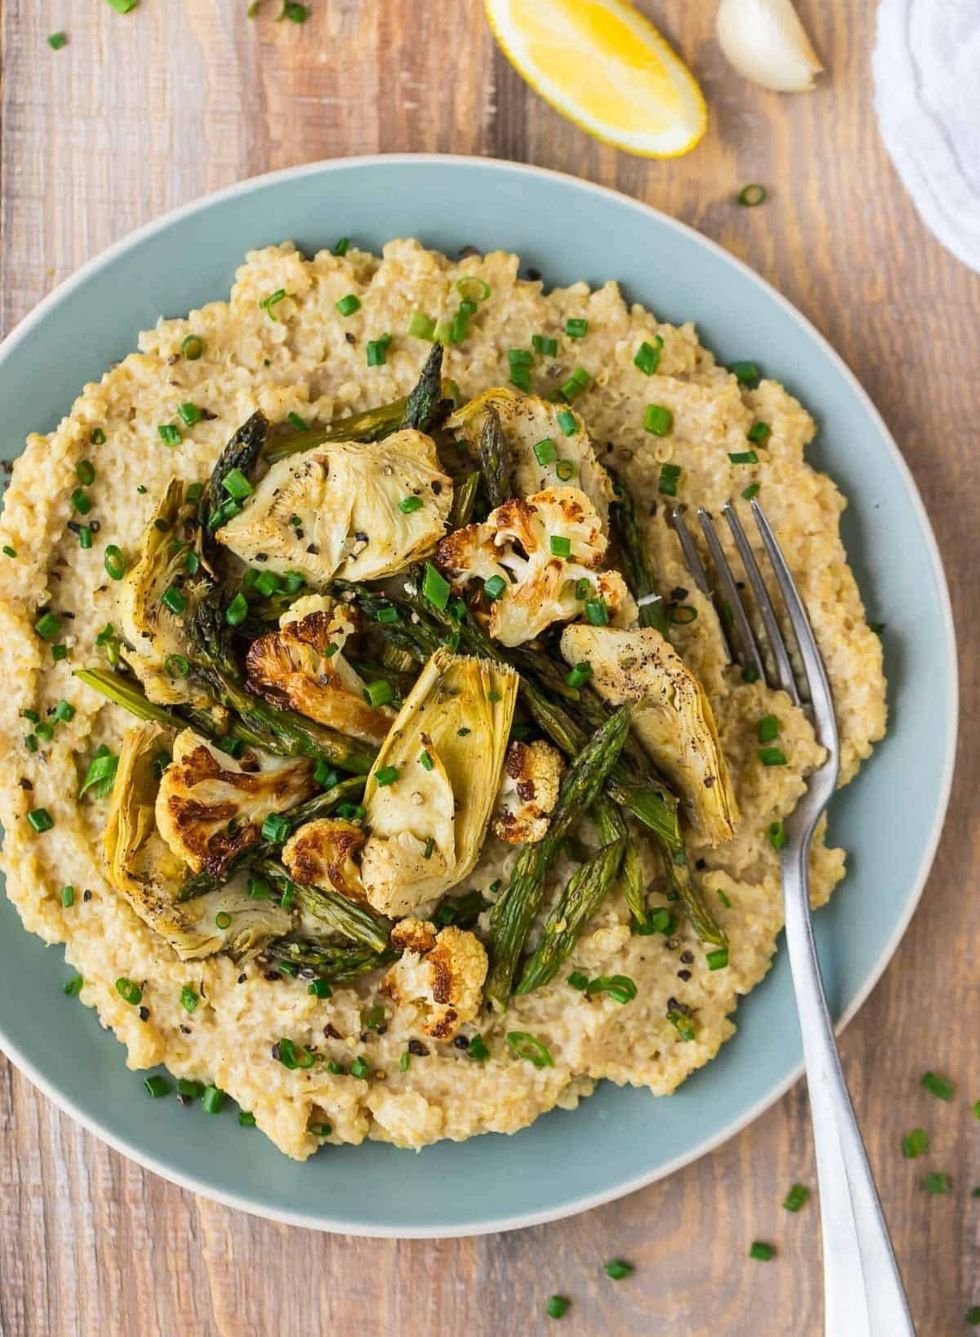 Creamy Vegan Risotto With Asparagus and Quinoa for passover meals